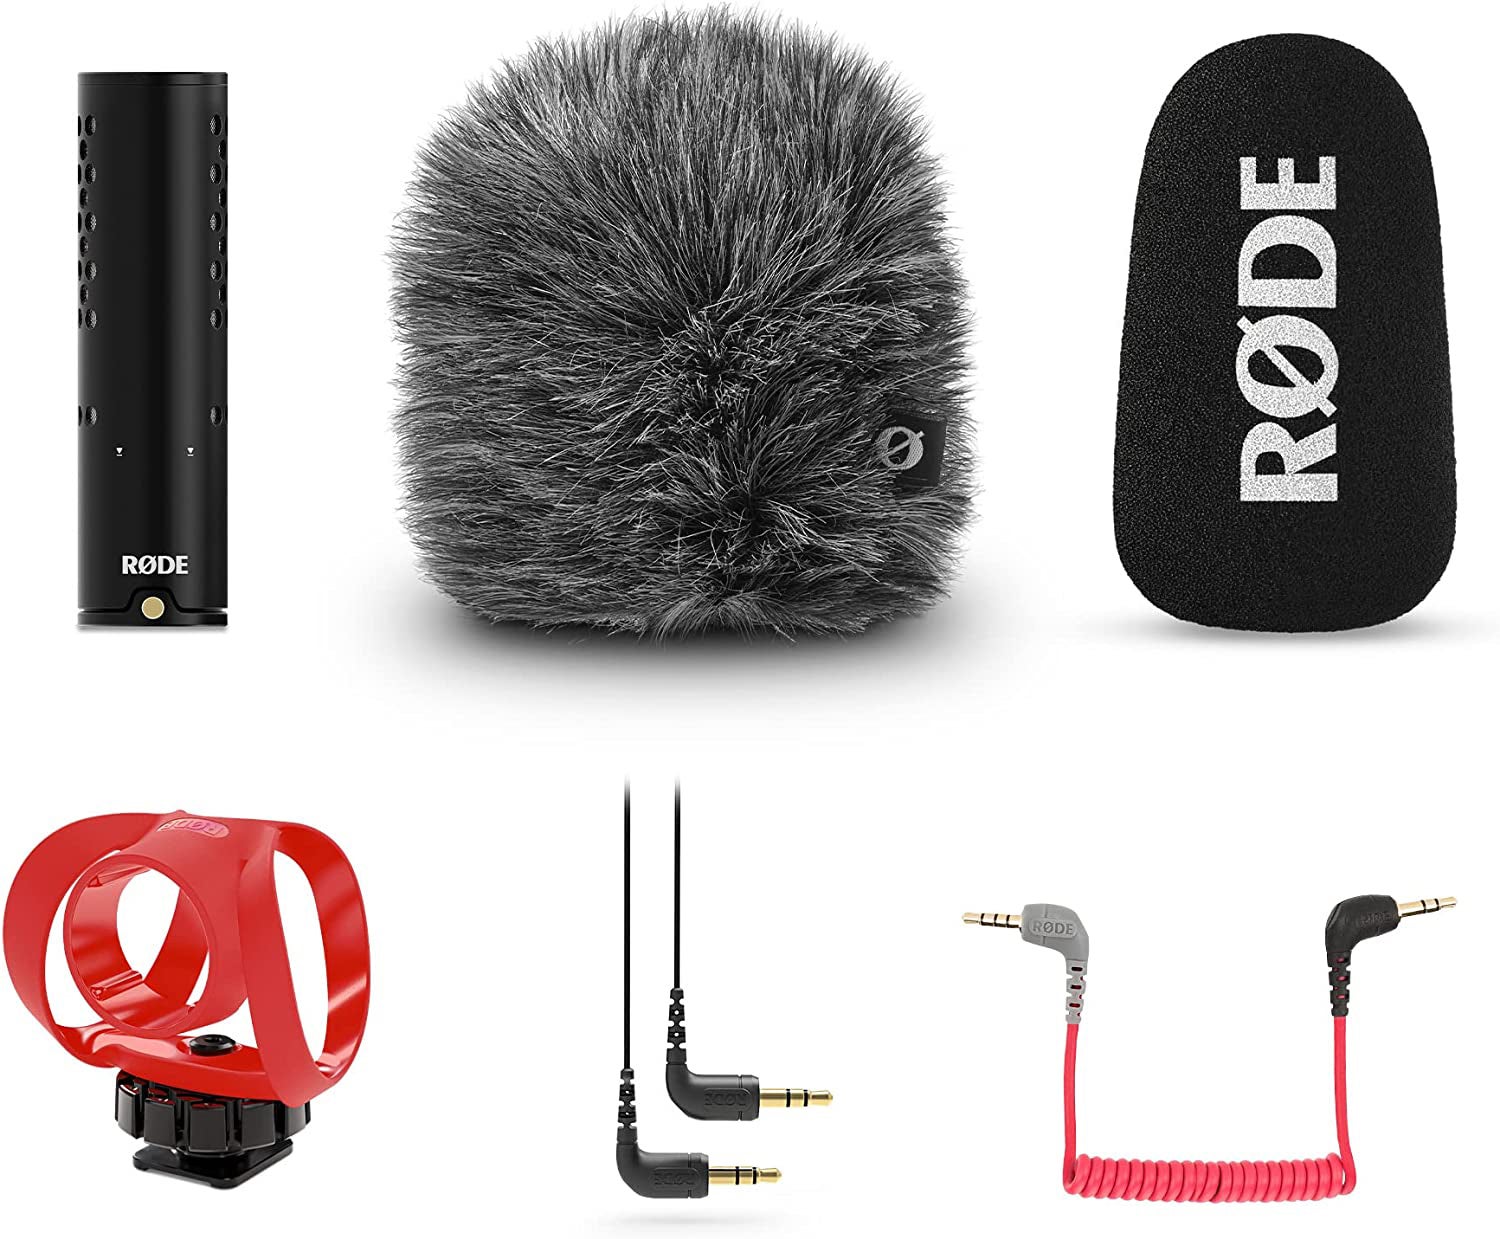 The Rode VideoMicro II comes with everything you need to get started.